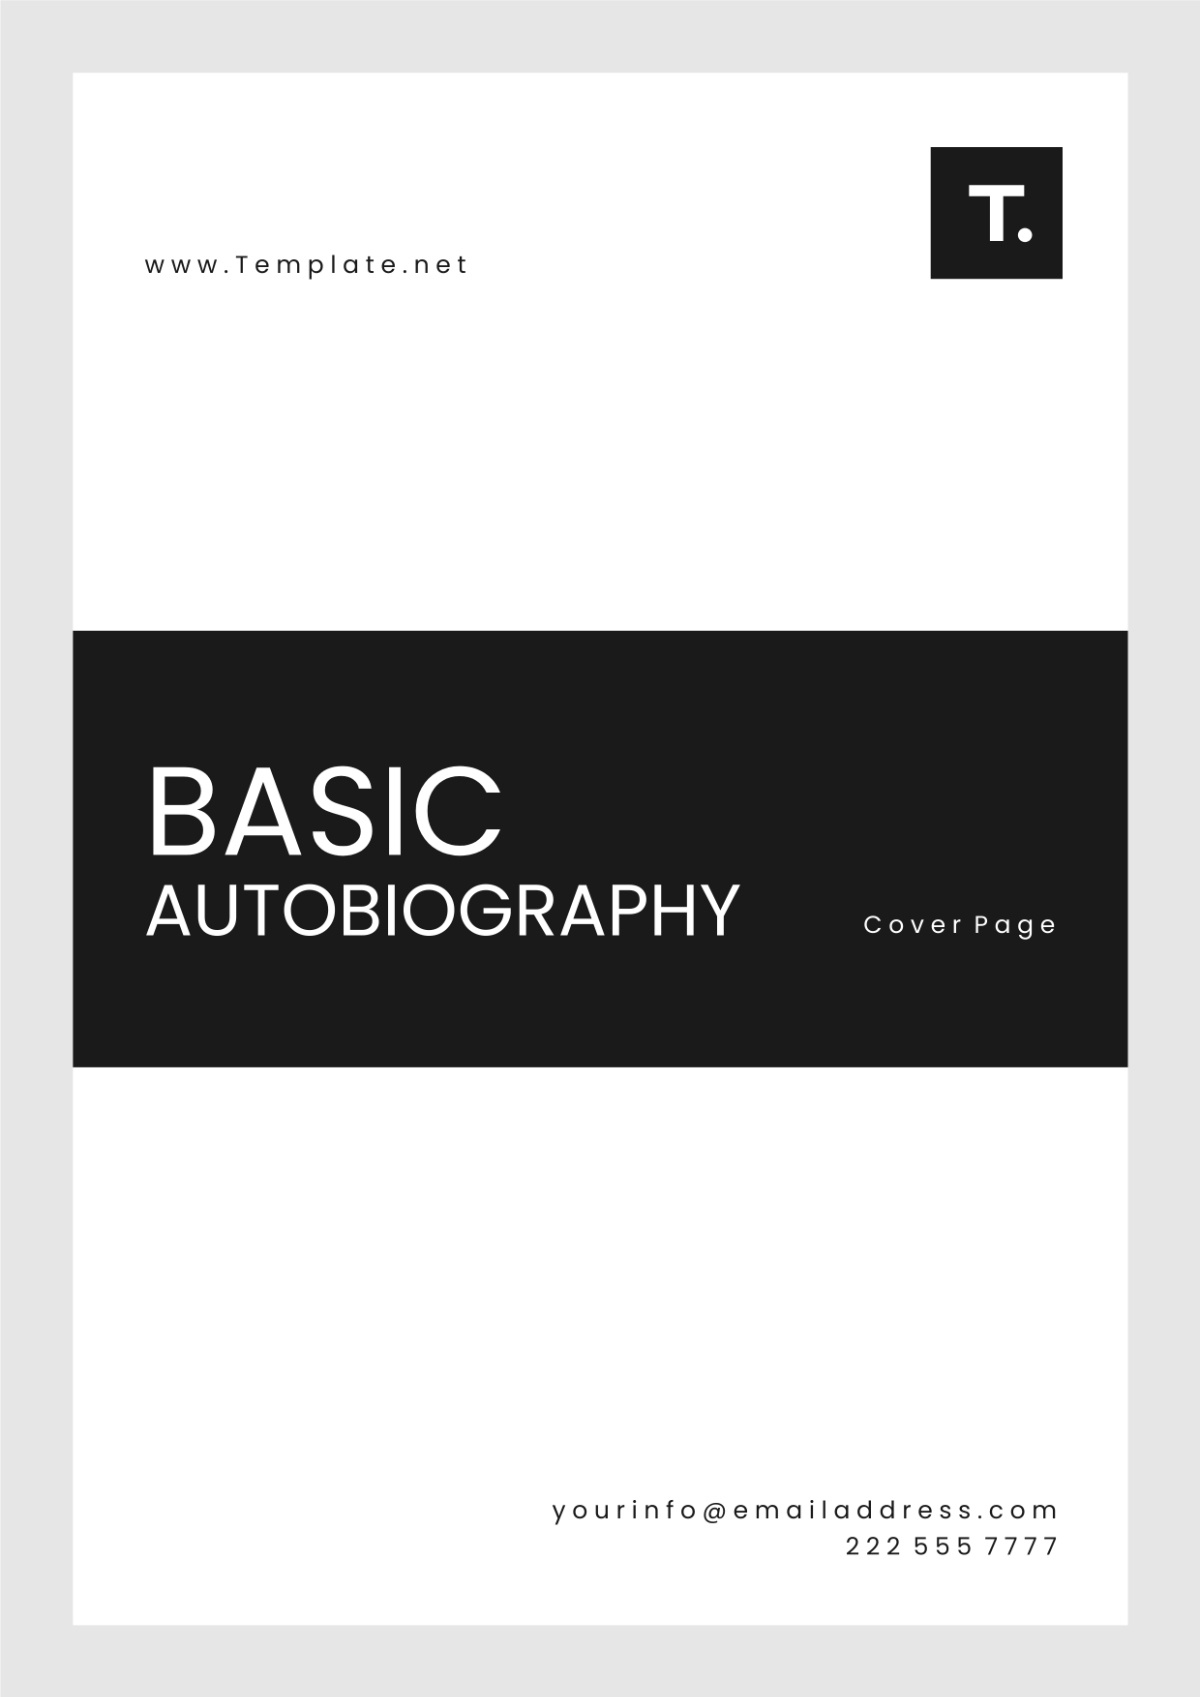 Basic Autobiography Cover Page